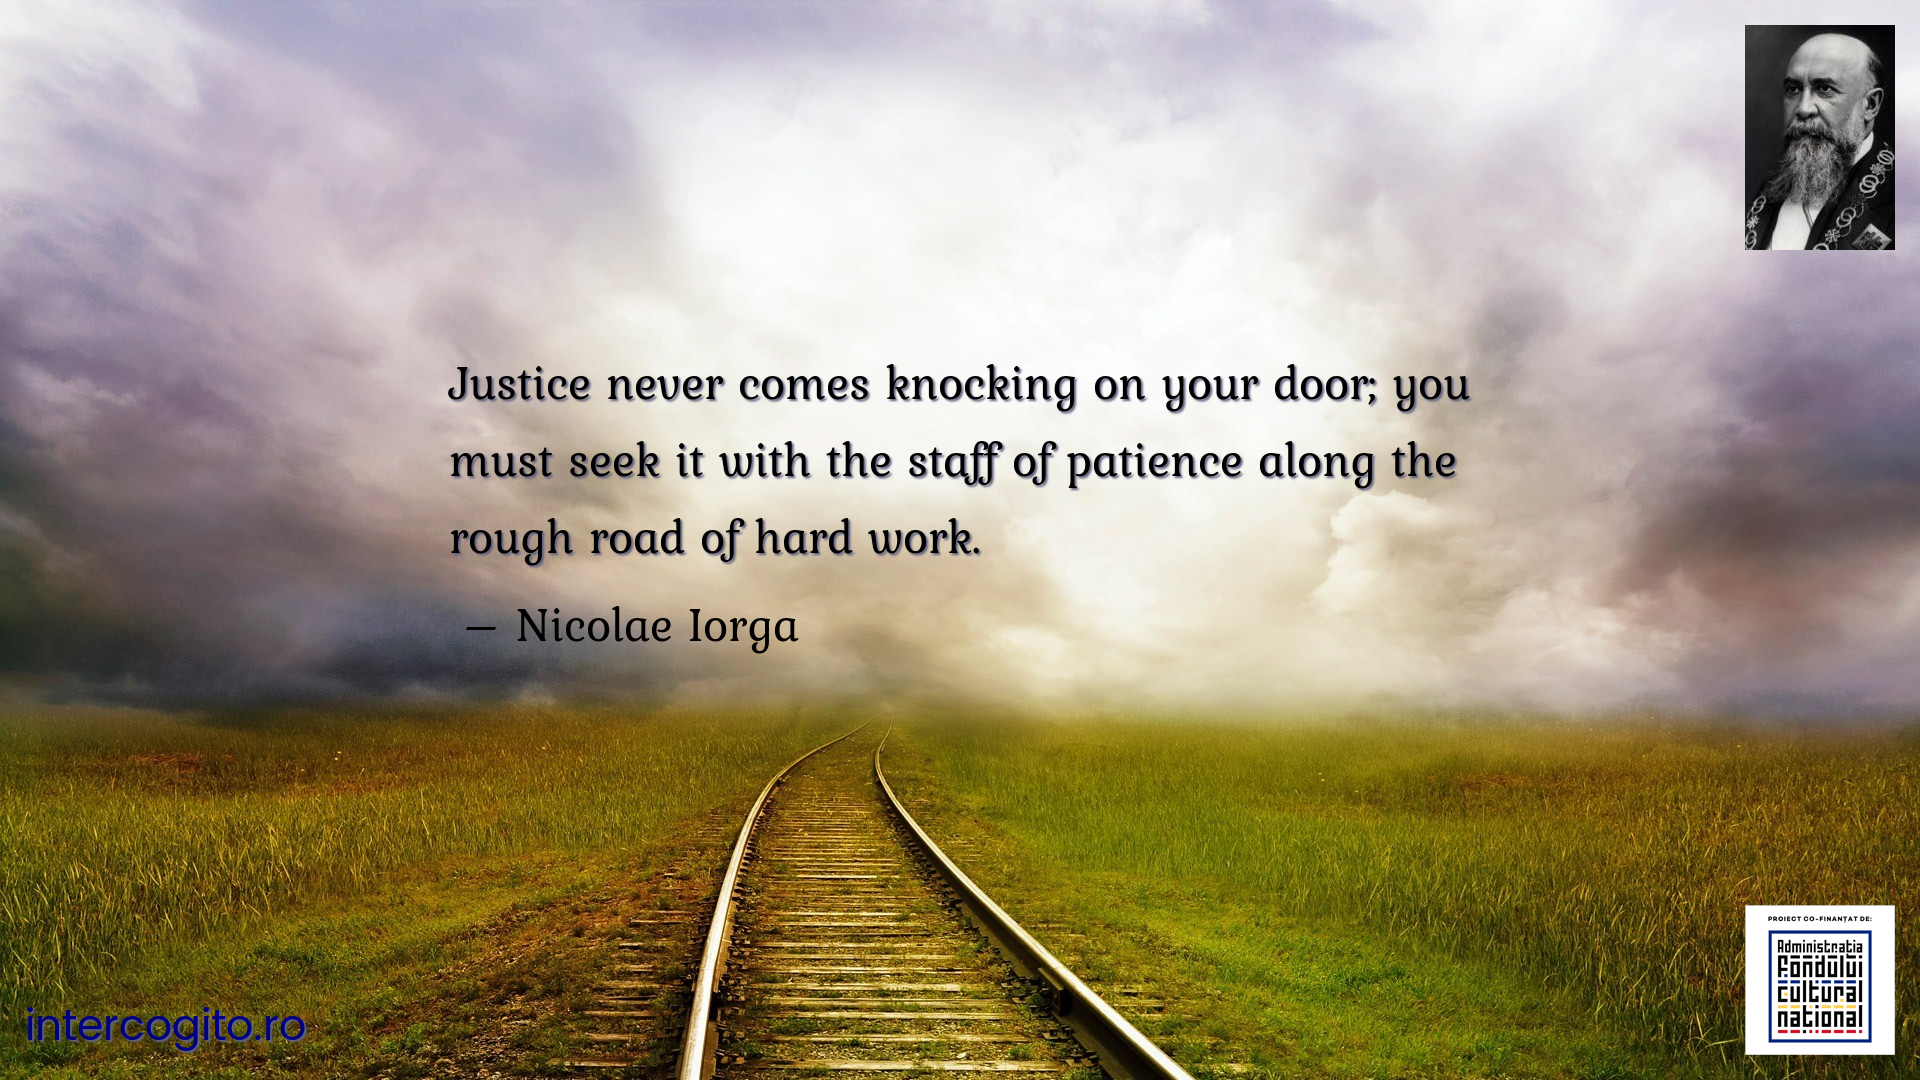 Justice never comes knocking on your door; you must seek it with the staff of patience along the rough road of hard work.